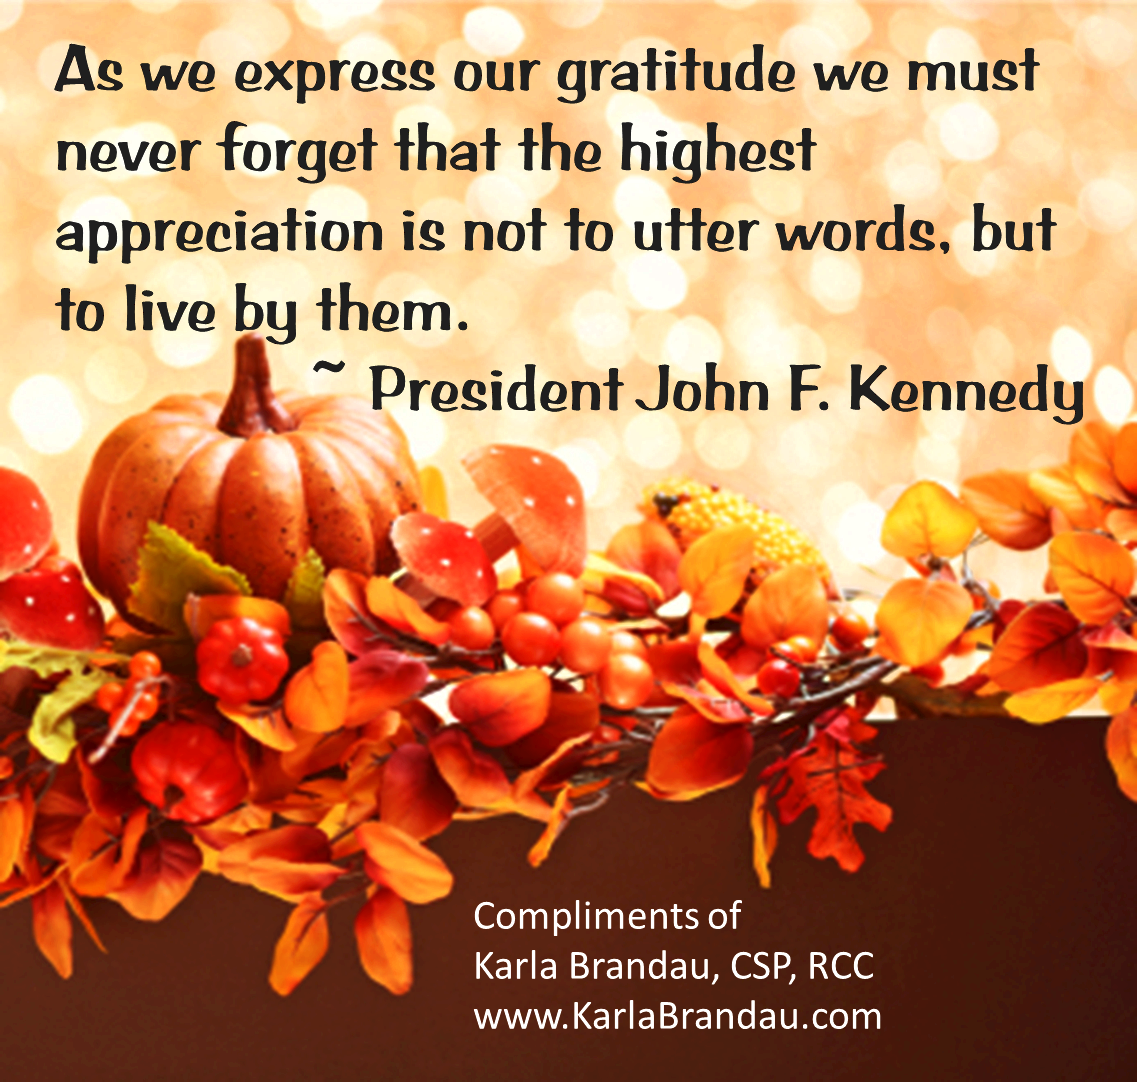 51 Best Thanksgiving Images Quotes Messages Greetings Images